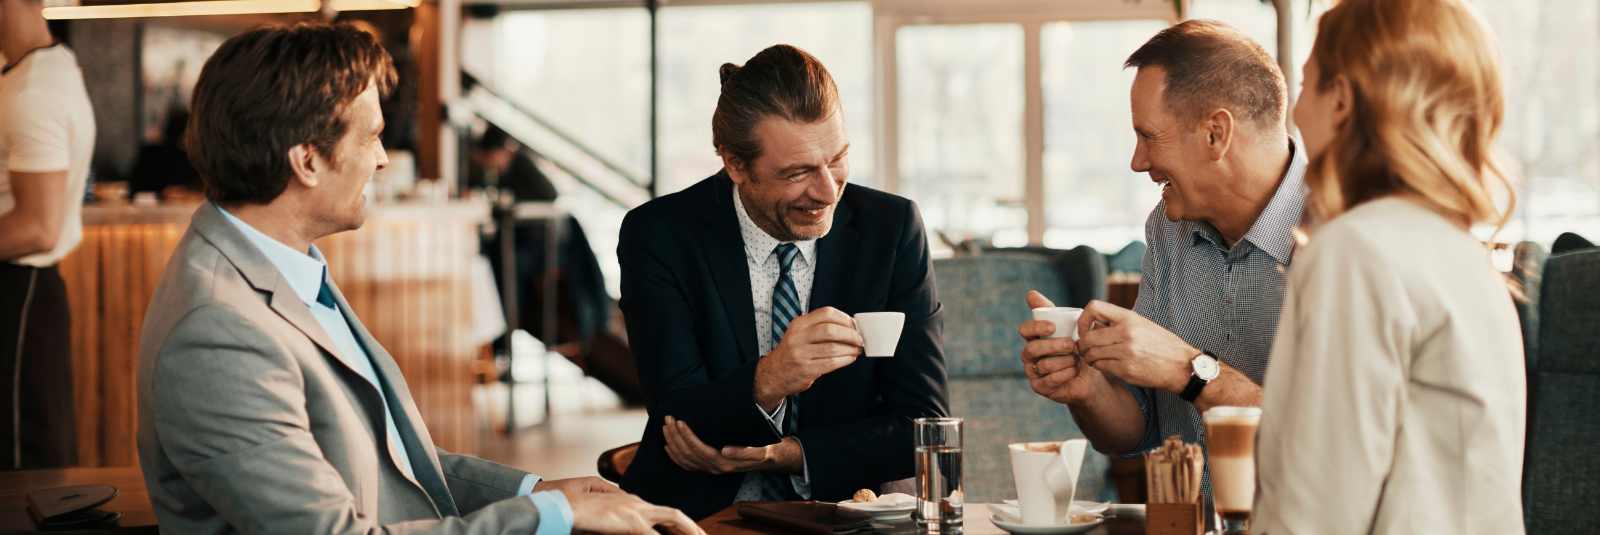 Business people in a meeting with coffee